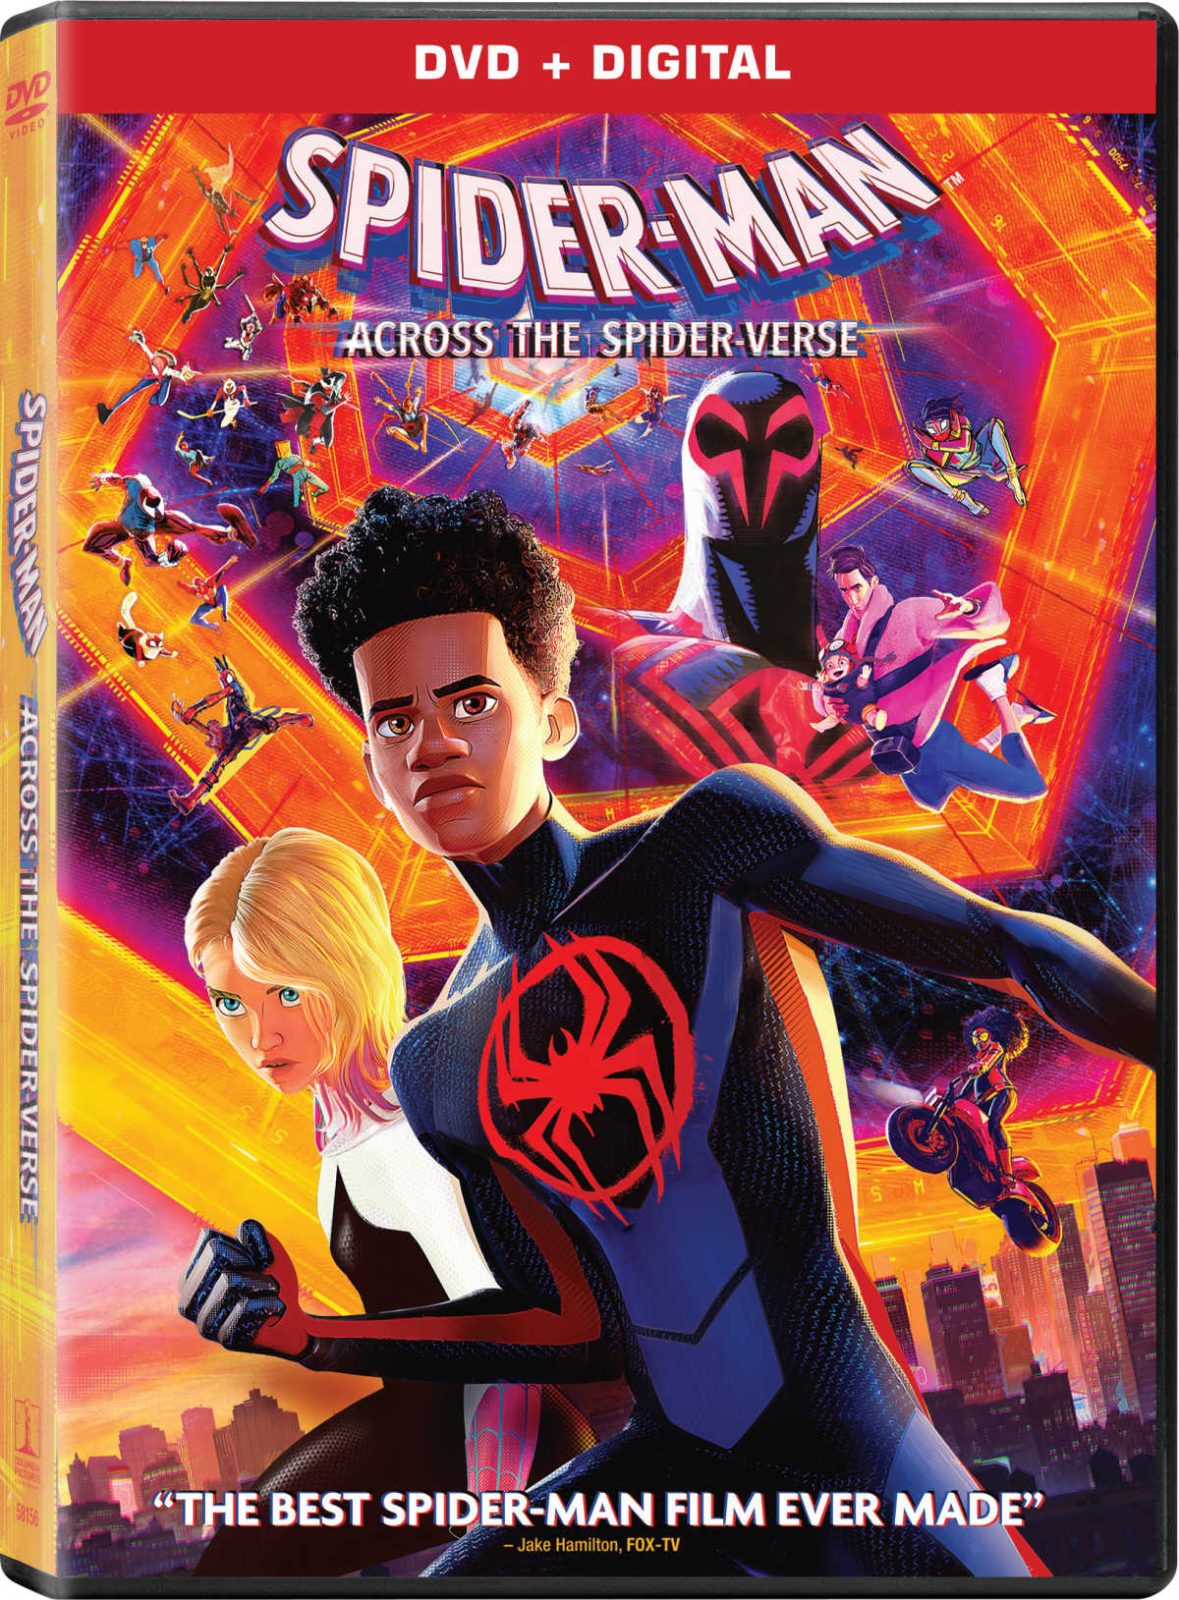 Spider-Man: Across the Spider-Verse is a visually stunning, action-packed, and heartwarming animated adventure for fans of all ages. With its talented voice cast, diverse characters, and clever humor, this movie is sure to please everyone.